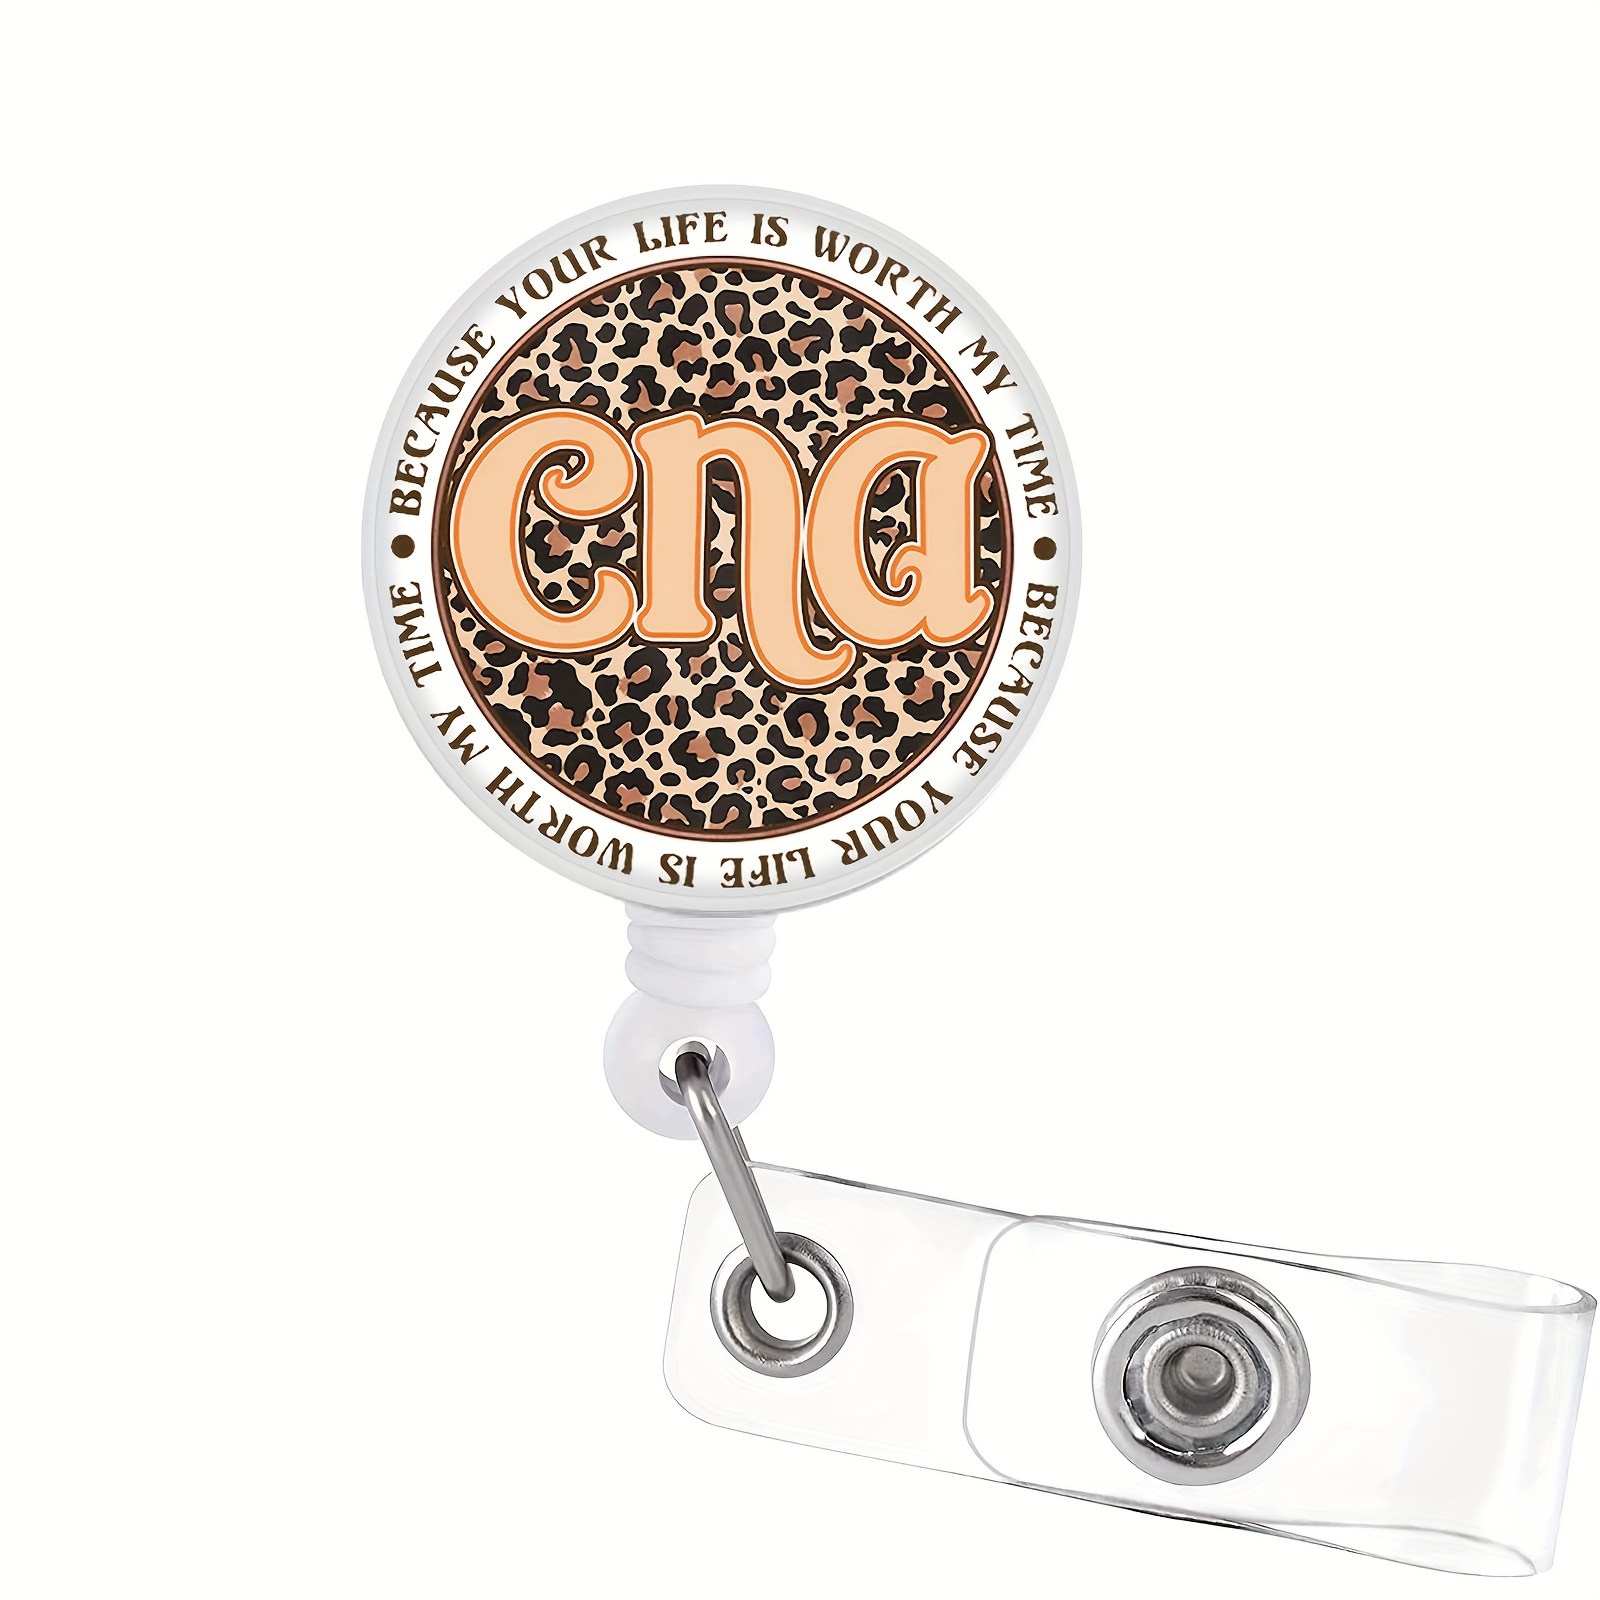 1pc Badge Reels Holder Retractable with ID Clip for Nurse Name Tag Card Funny Cute Leopard Cna Face Printed Nursing Doctor Teacher Medical Work